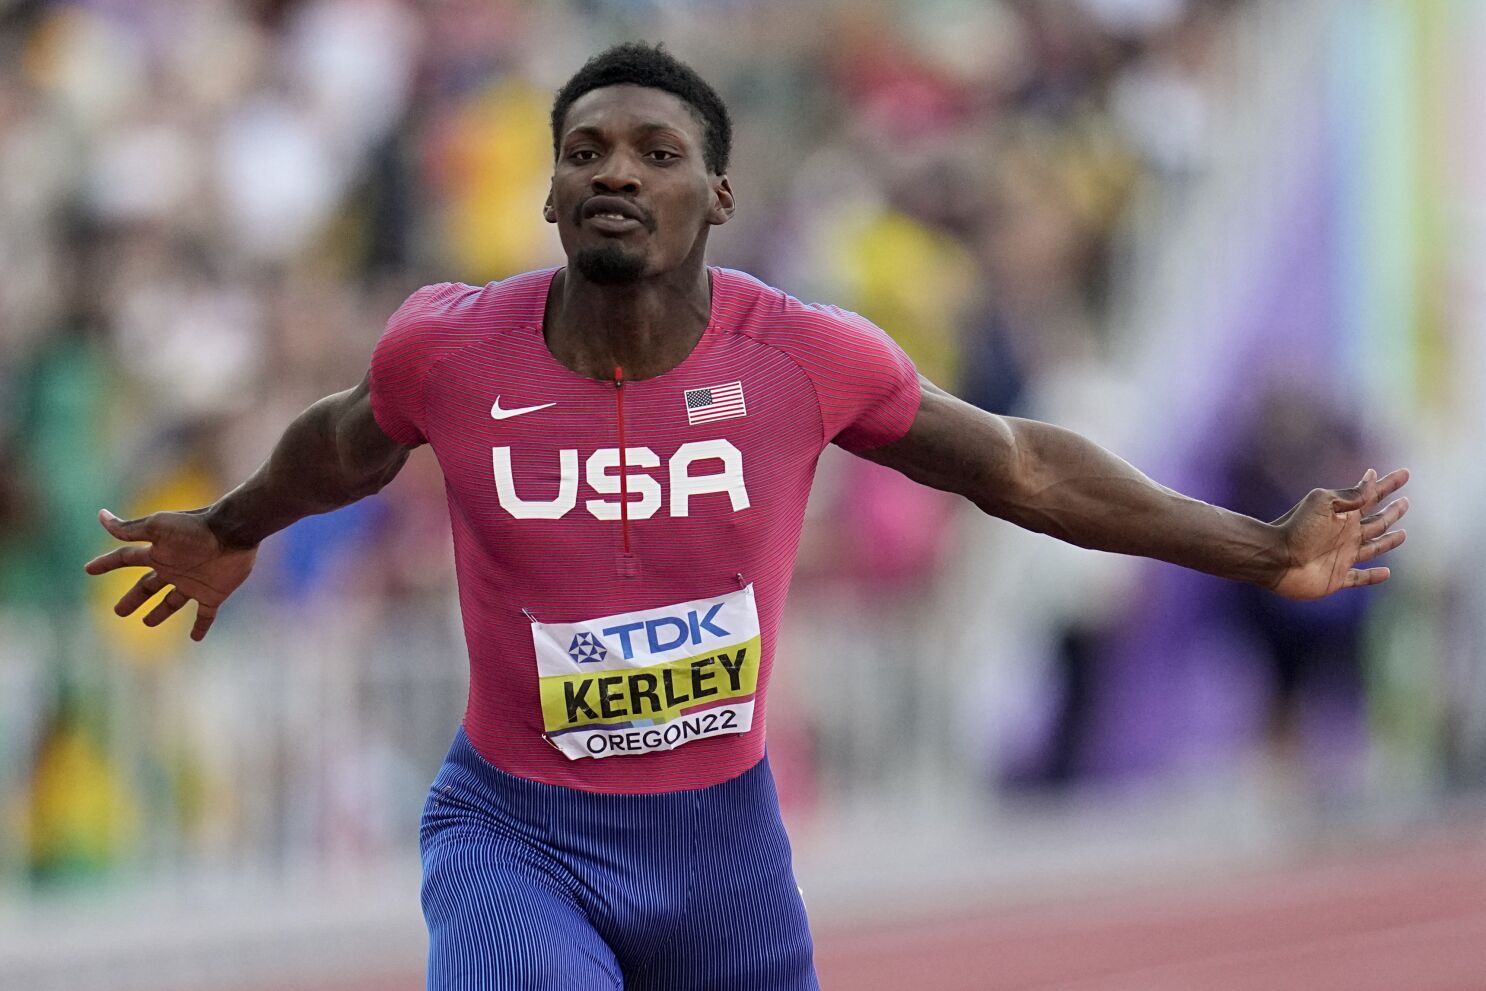 Kerley leads a U.S. sweep the 100 meters at worlds - Los Times